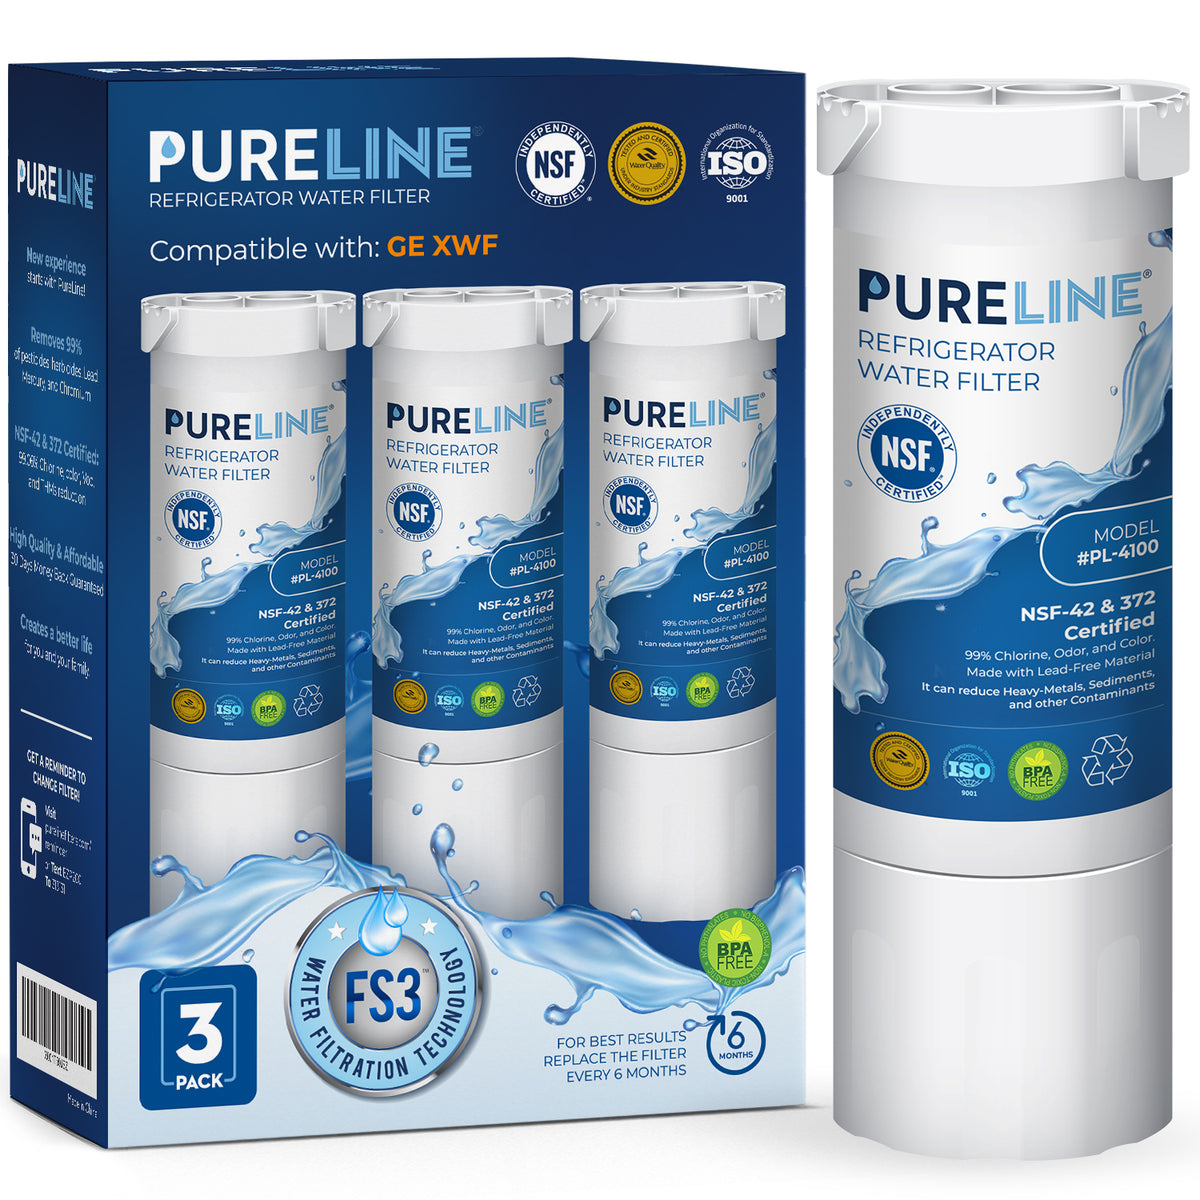 Pureline Replacement for GE GXRTDR and Samsung DA29-10105J Refrigerato –  Pure Line Filters